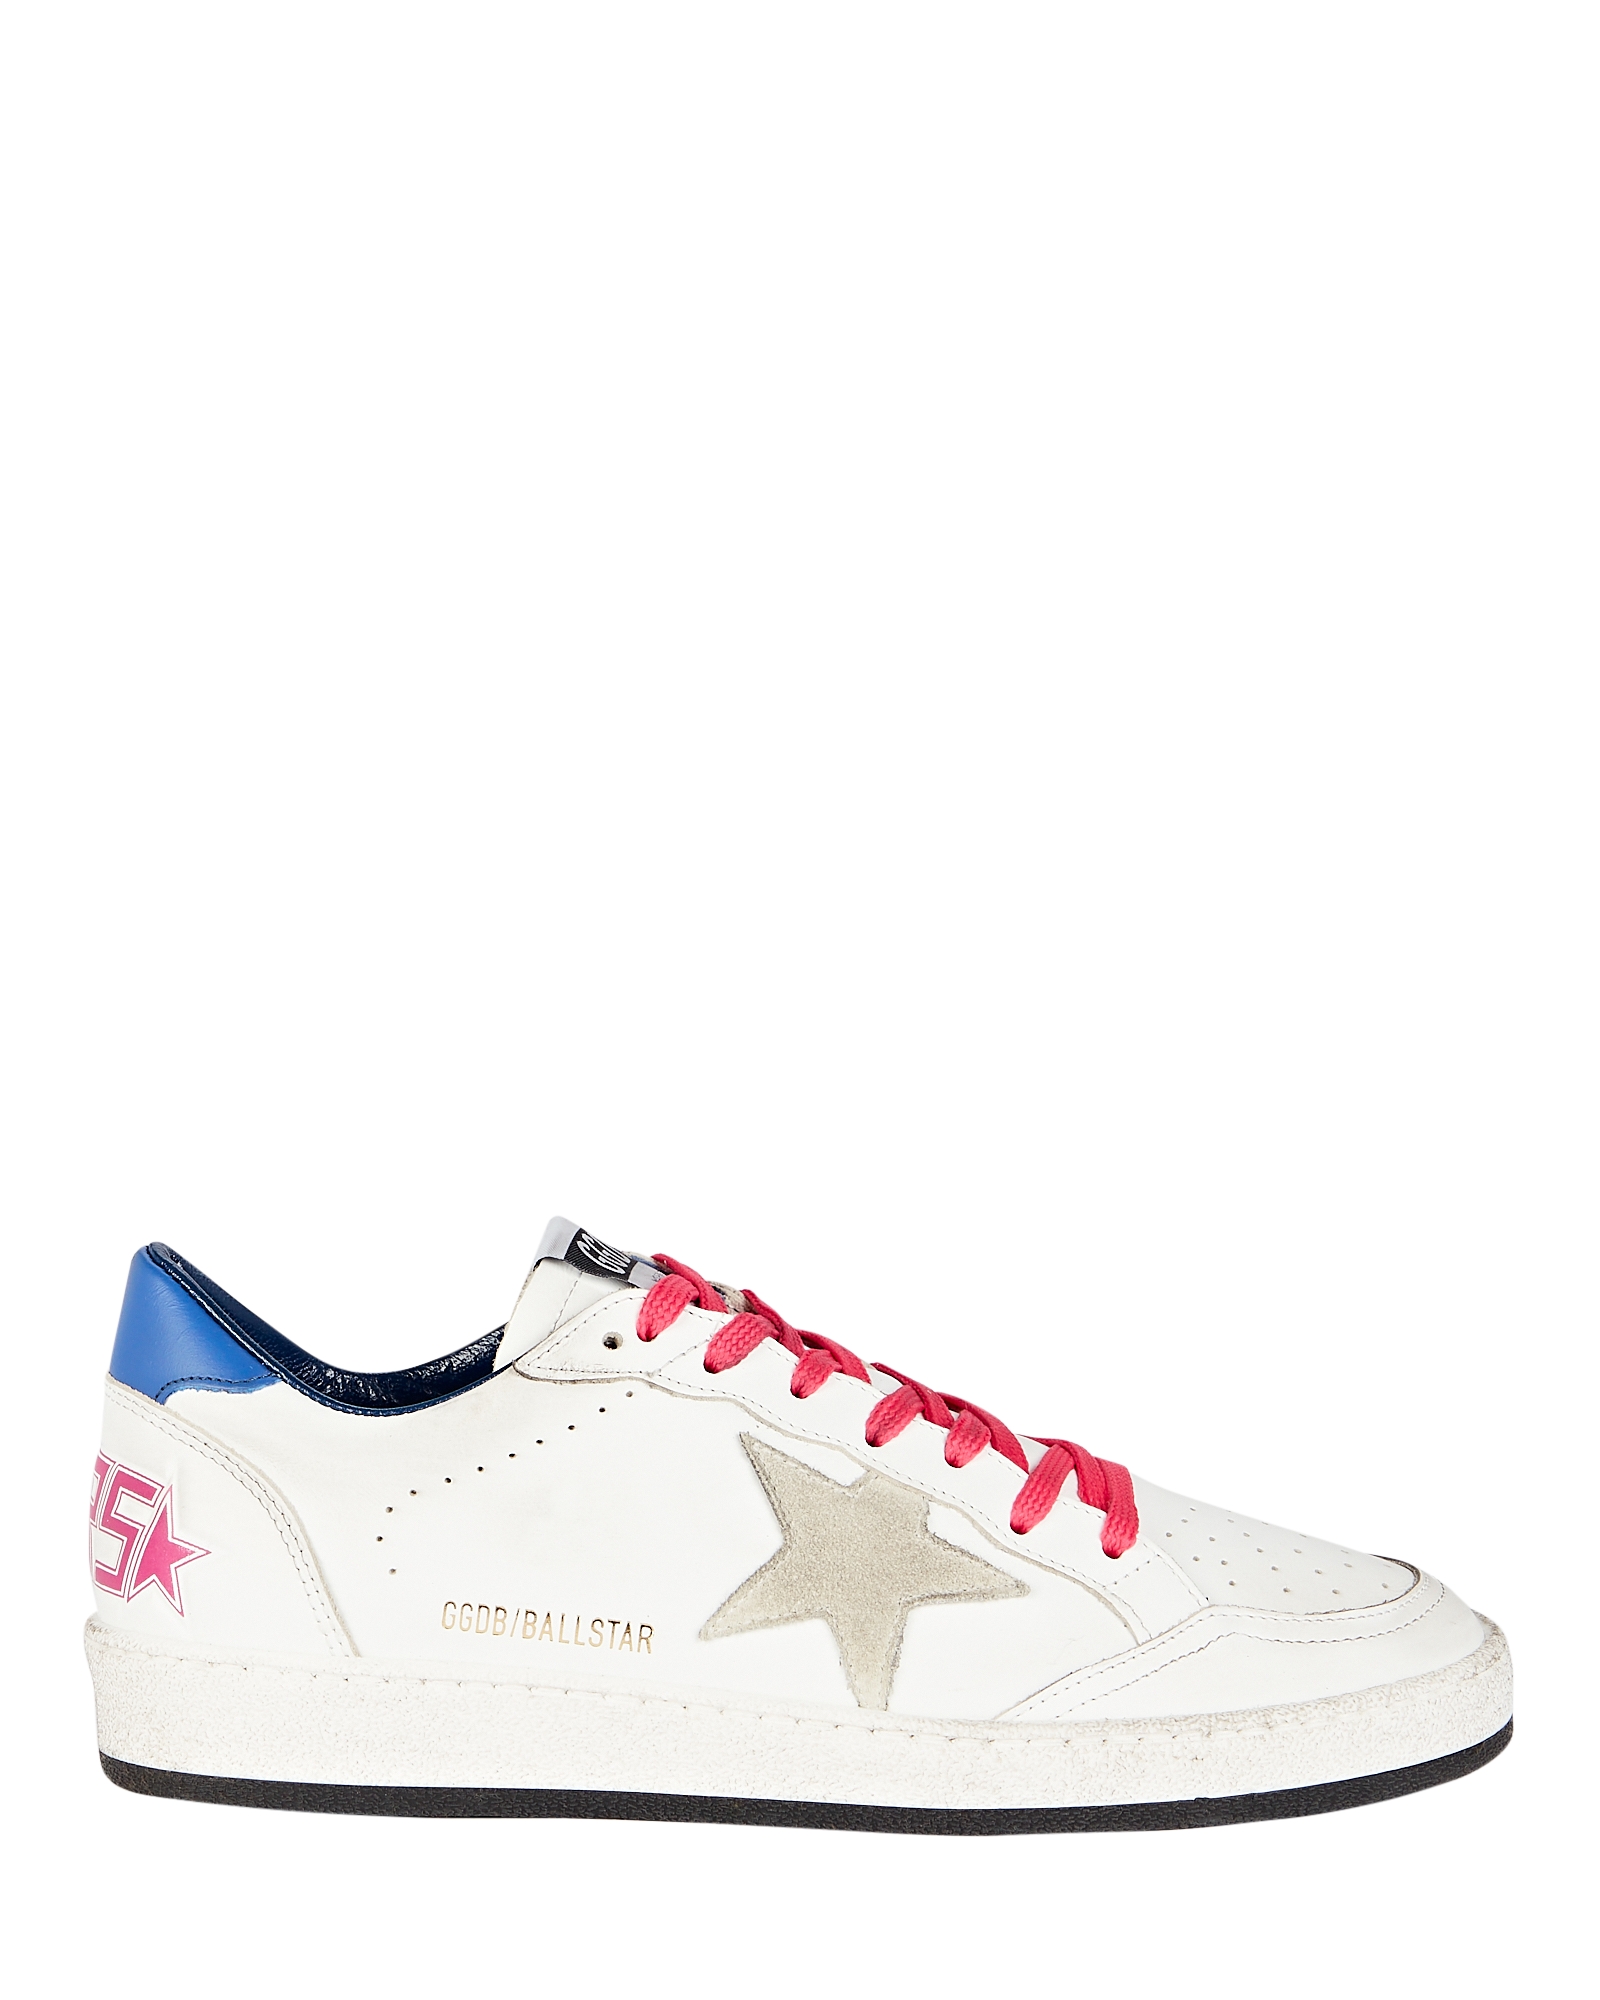 GOLDEN GOOSE BALL STAR LEATHER SNEAKERS,060093105686